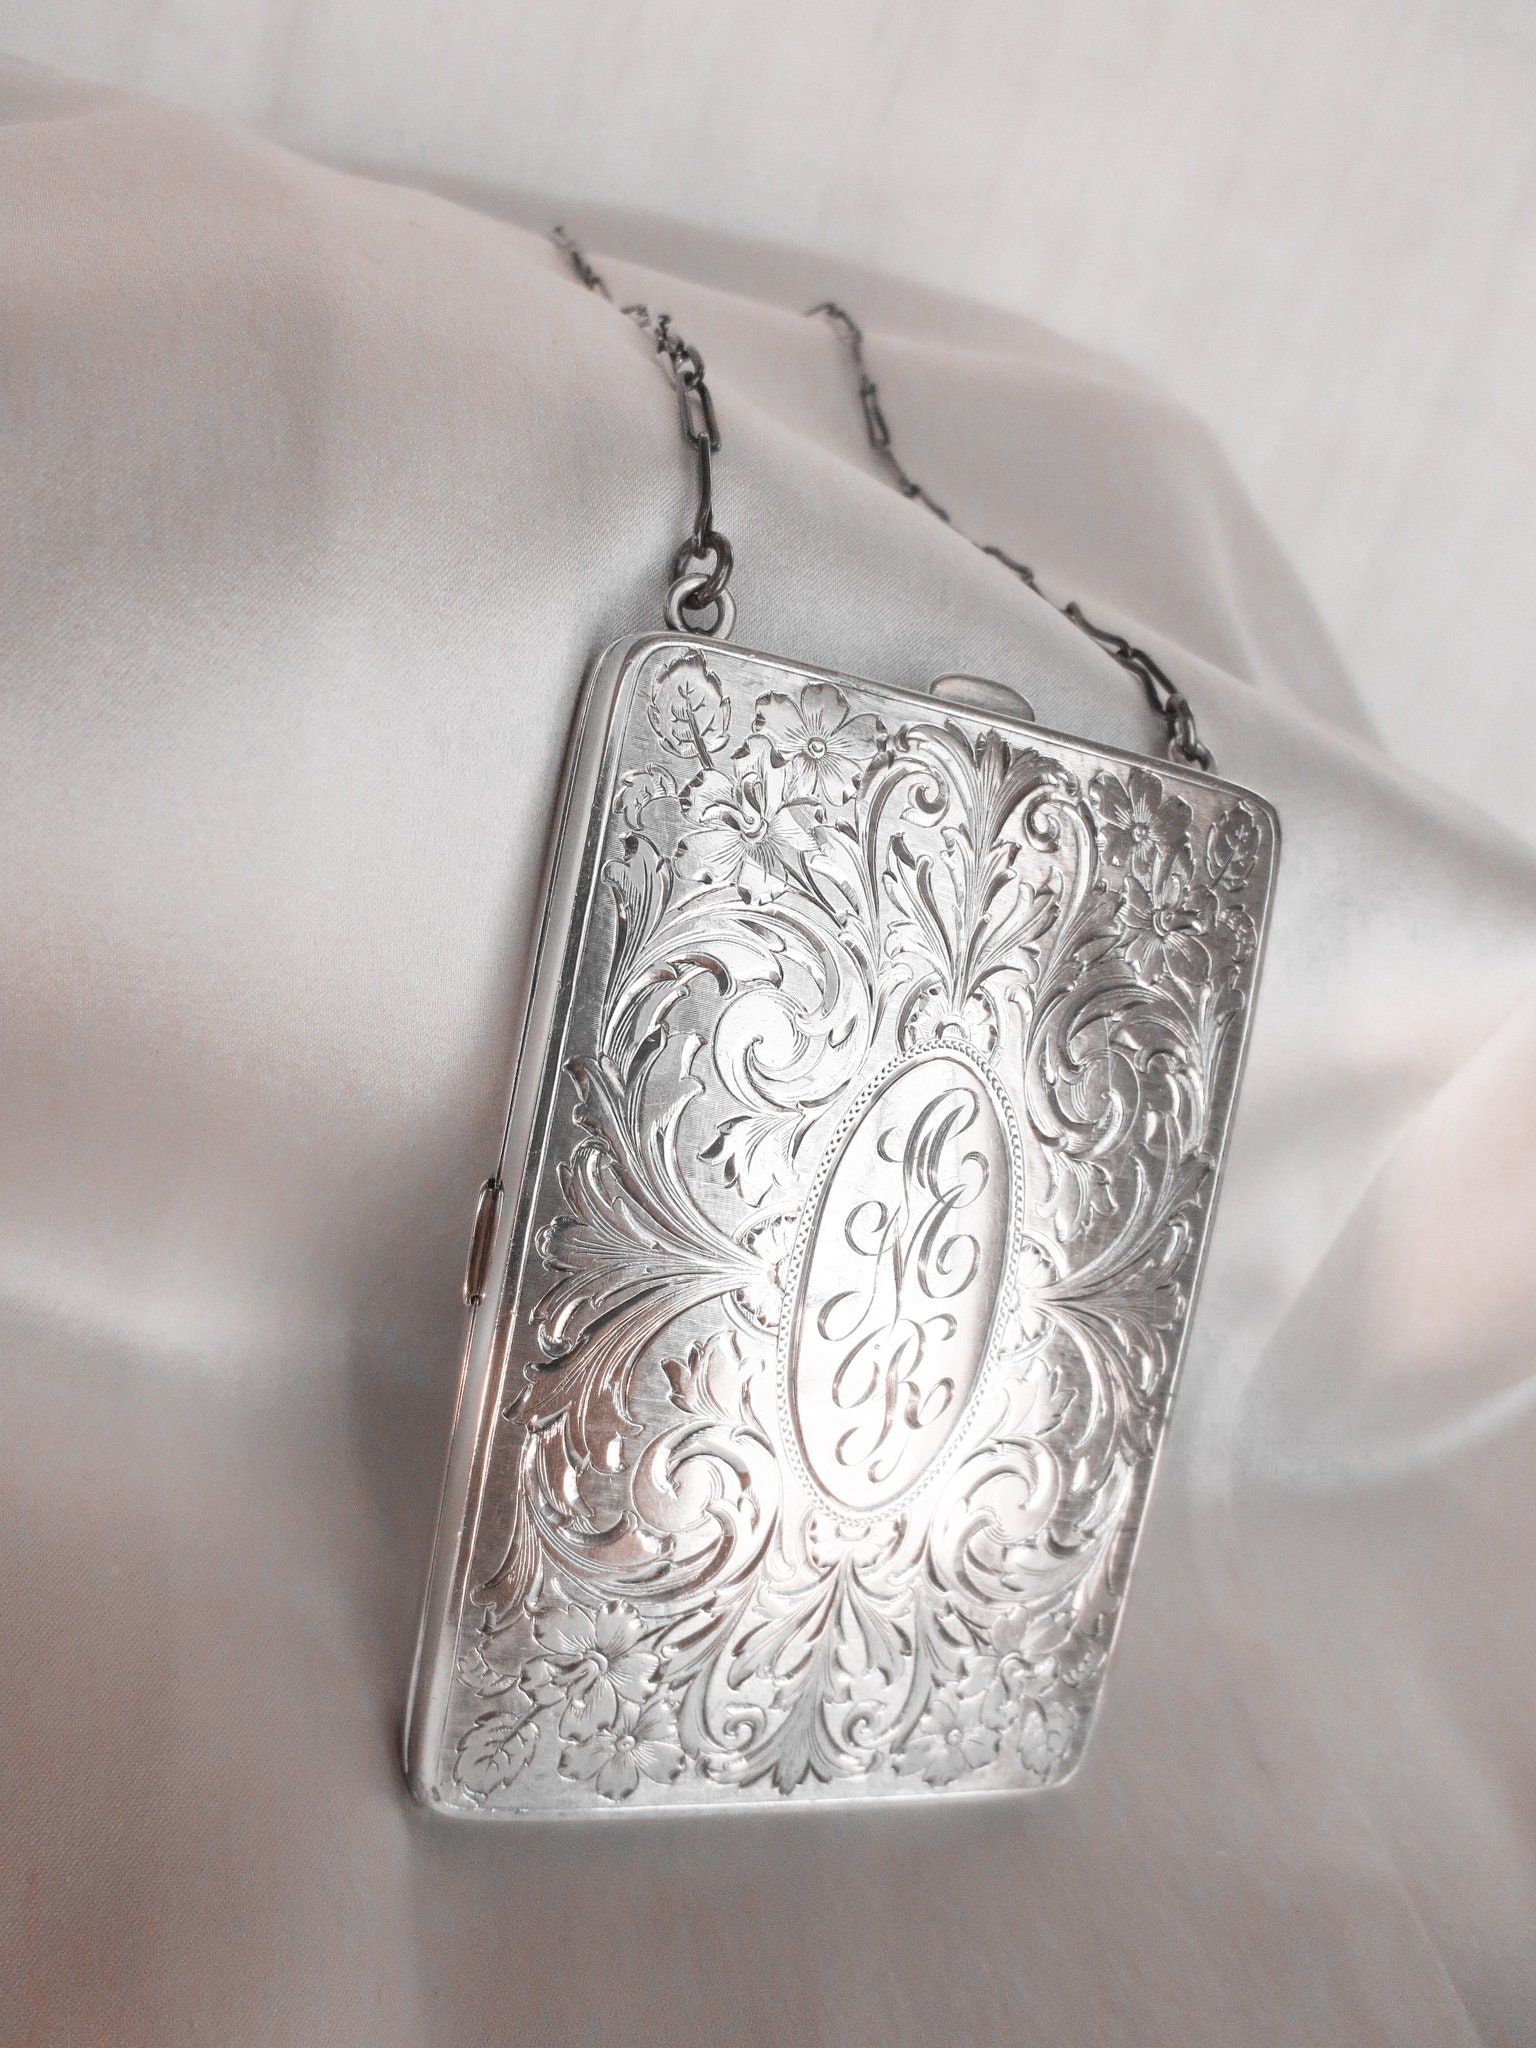 Sold at Auction: Sterling Silver Coin Purse